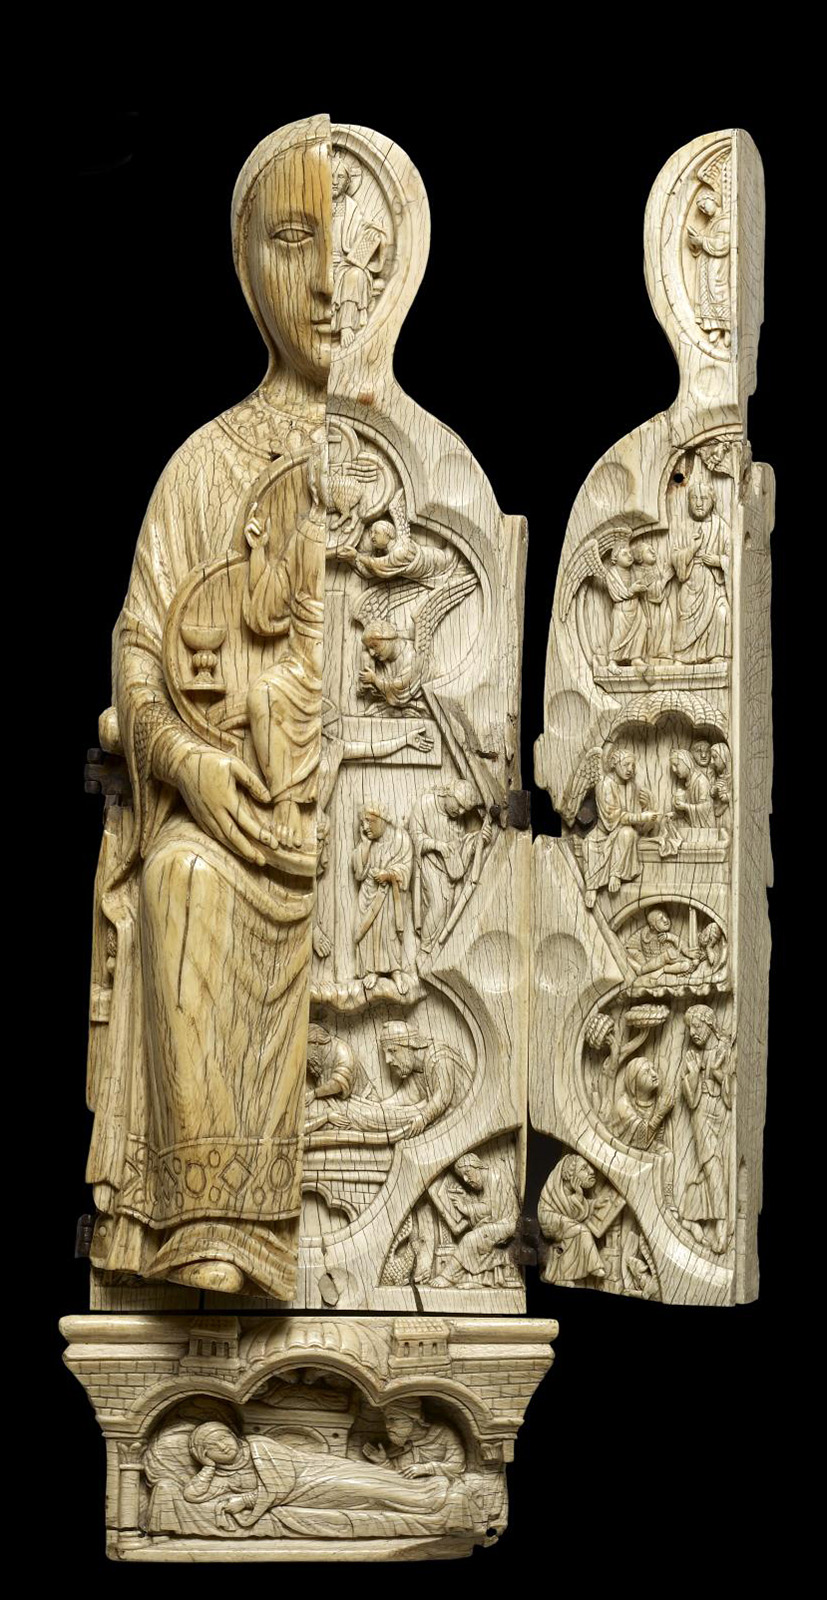 An ivory triptych in the form of a seated woman, right wing open, carved with many figures in multiple scenes.